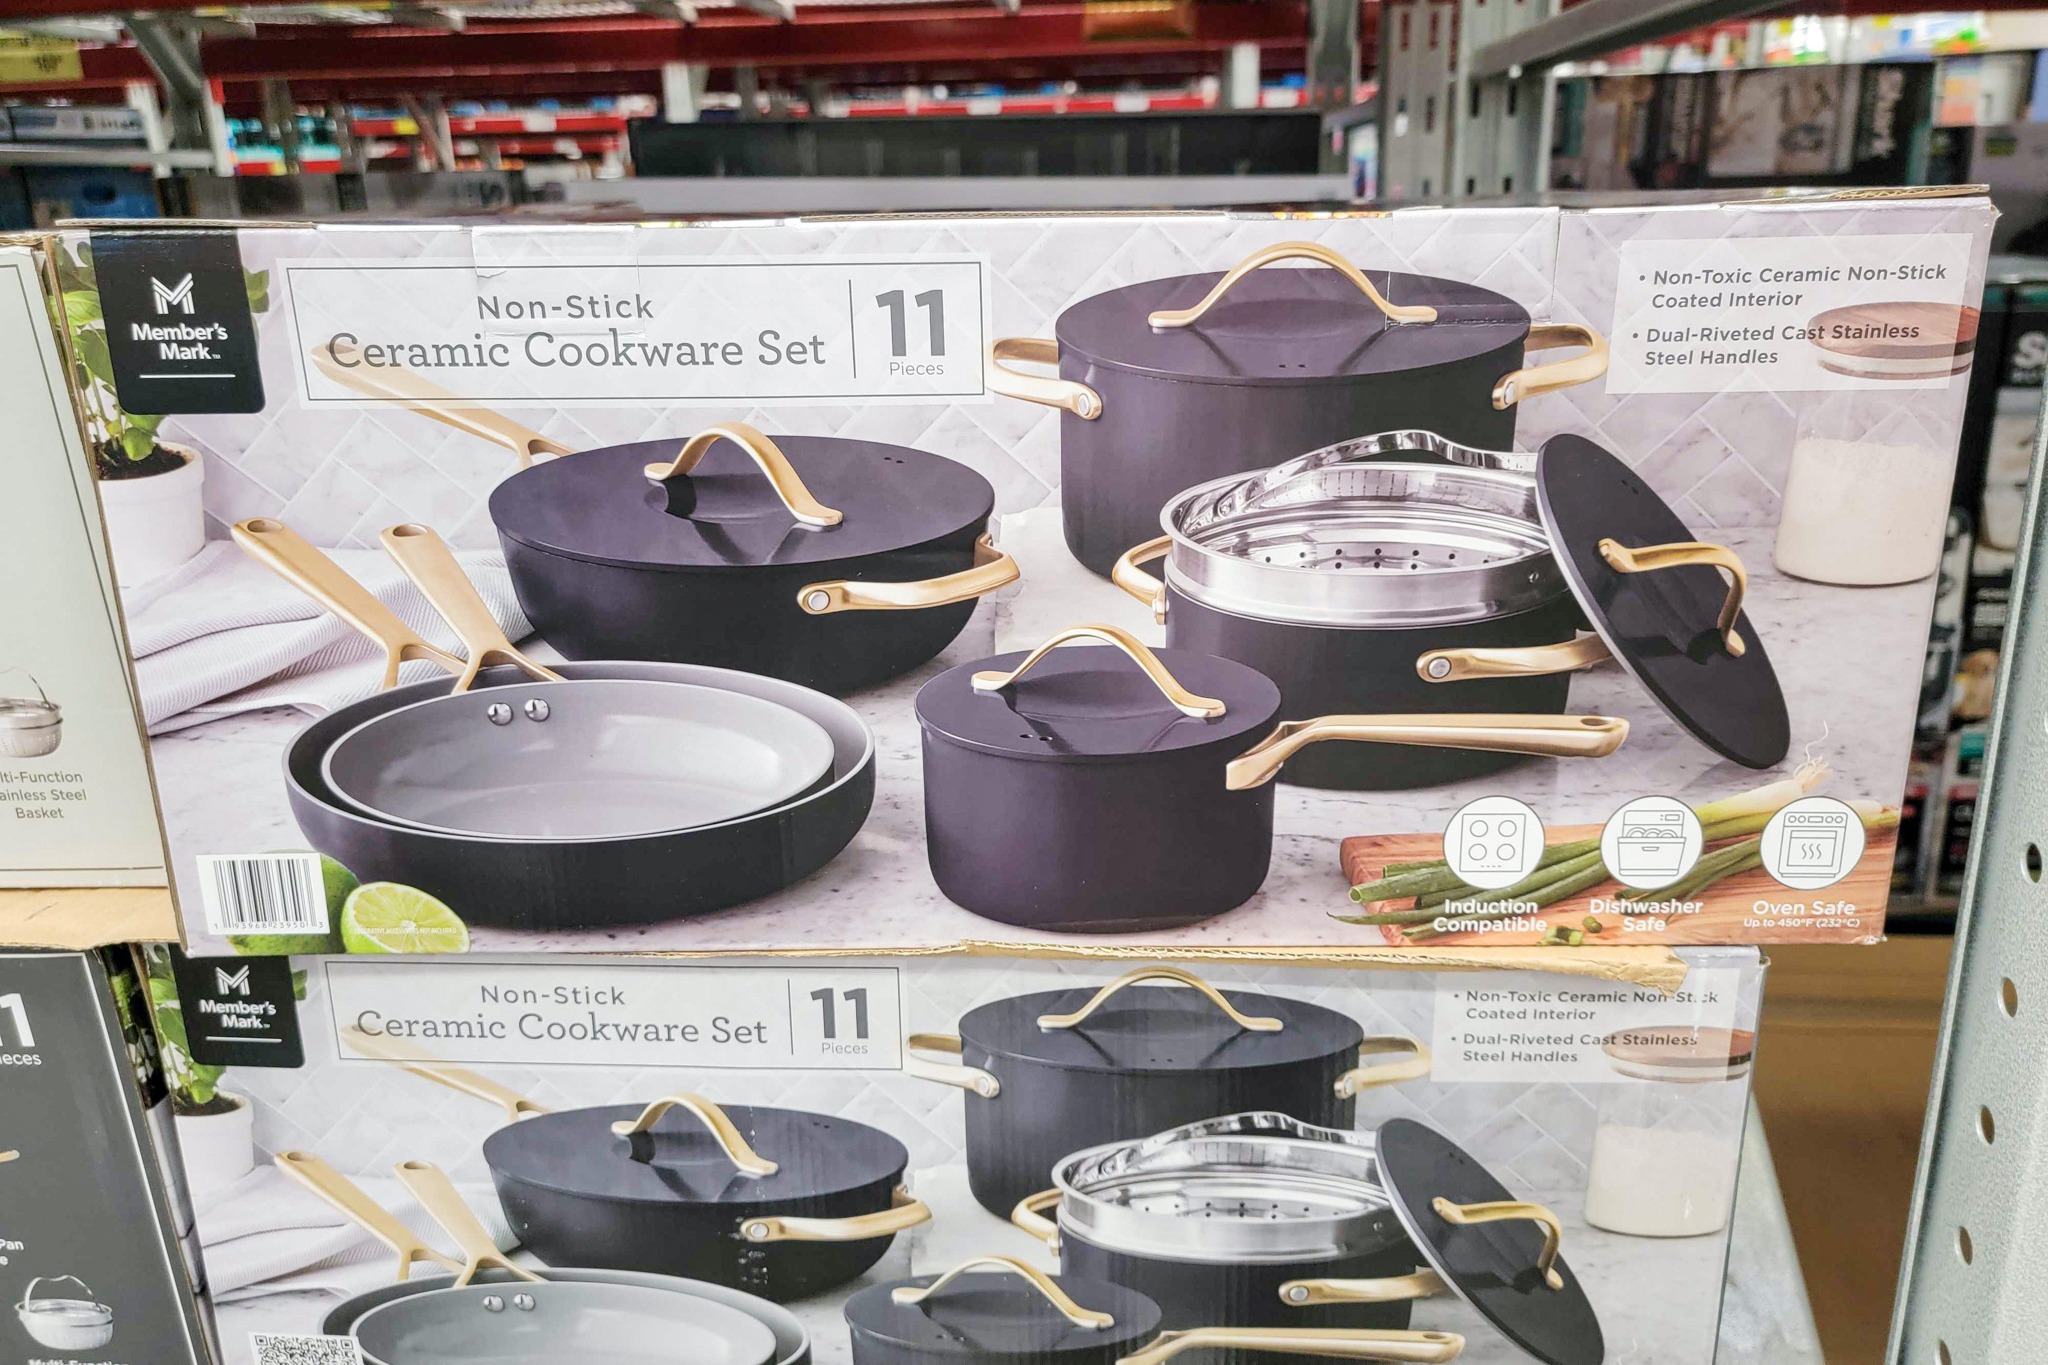 Members Mark 11 pc Ceramic Cookware Set (Blue & Gold) for Sale in